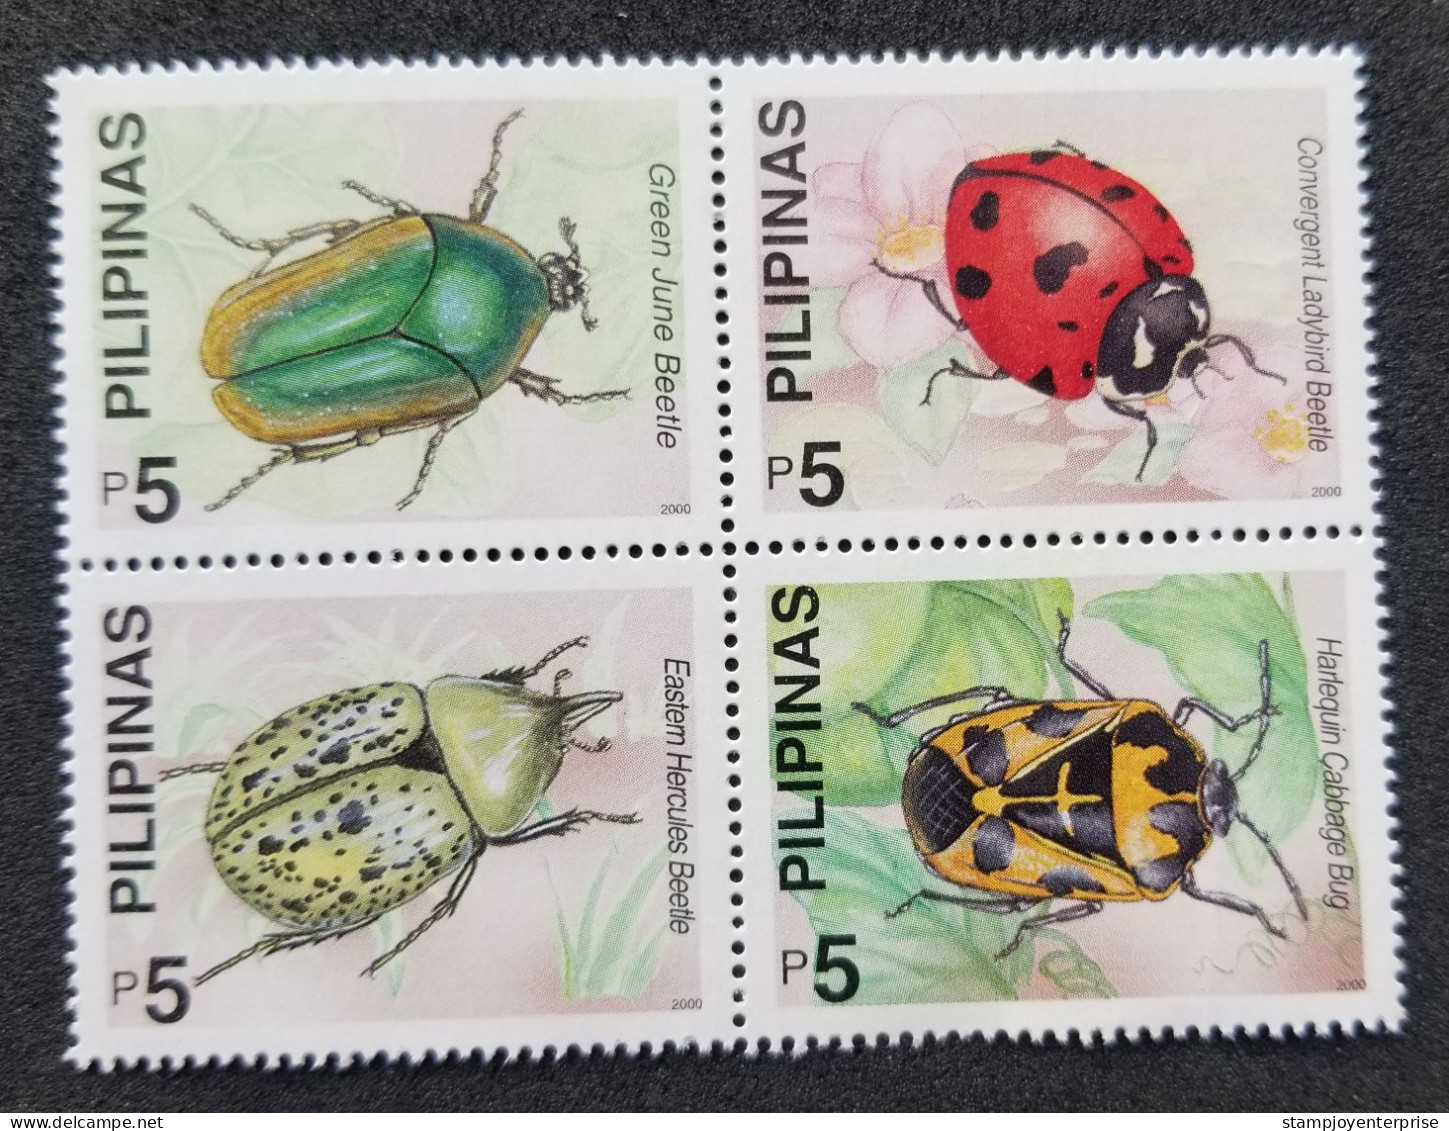 Philippines Insects 2000 Beetles Bug Ladybird Insect Beetle (stamp) MNH - Philippines